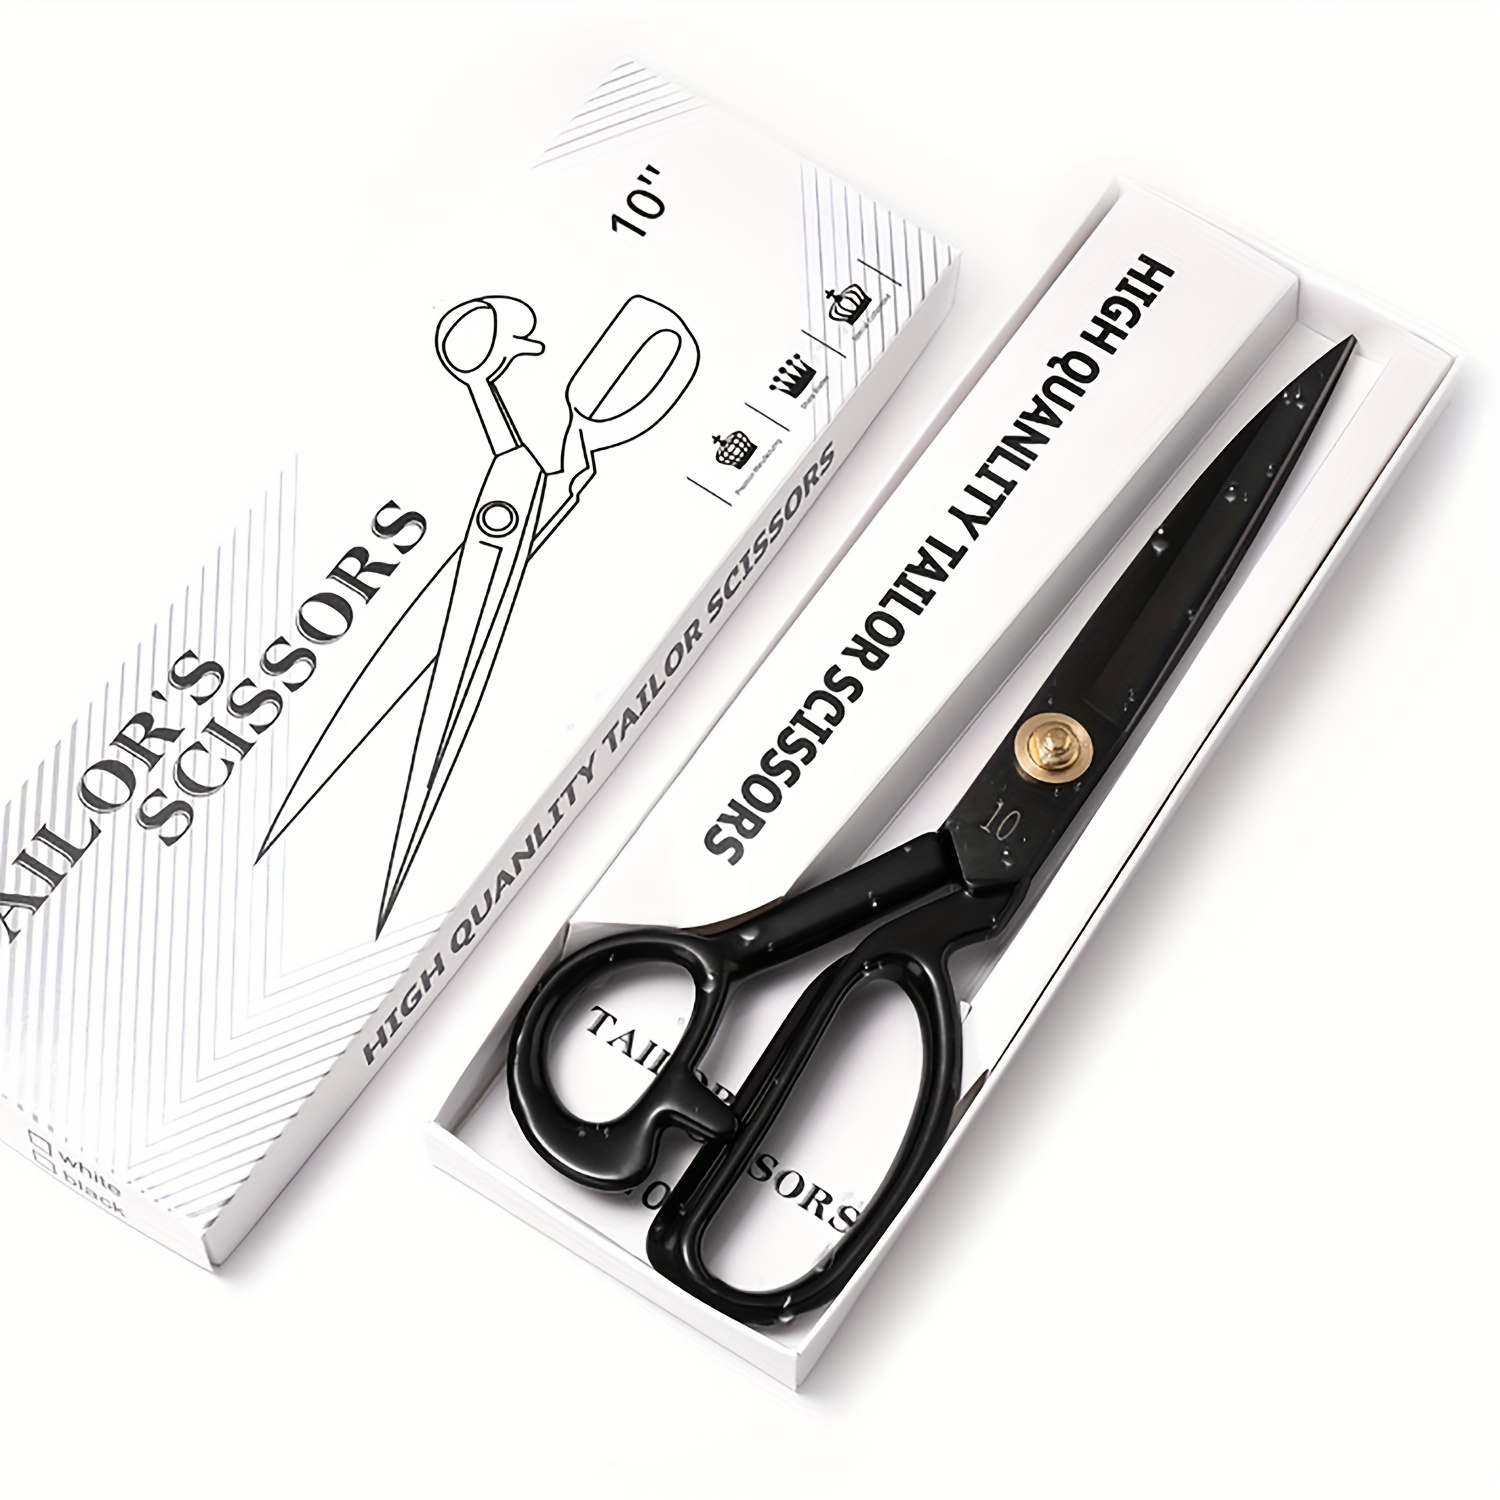 8 Tailor Upholstery Cutting Trimming Scissors Shears HEAVY DUTY-Stainless  Steel